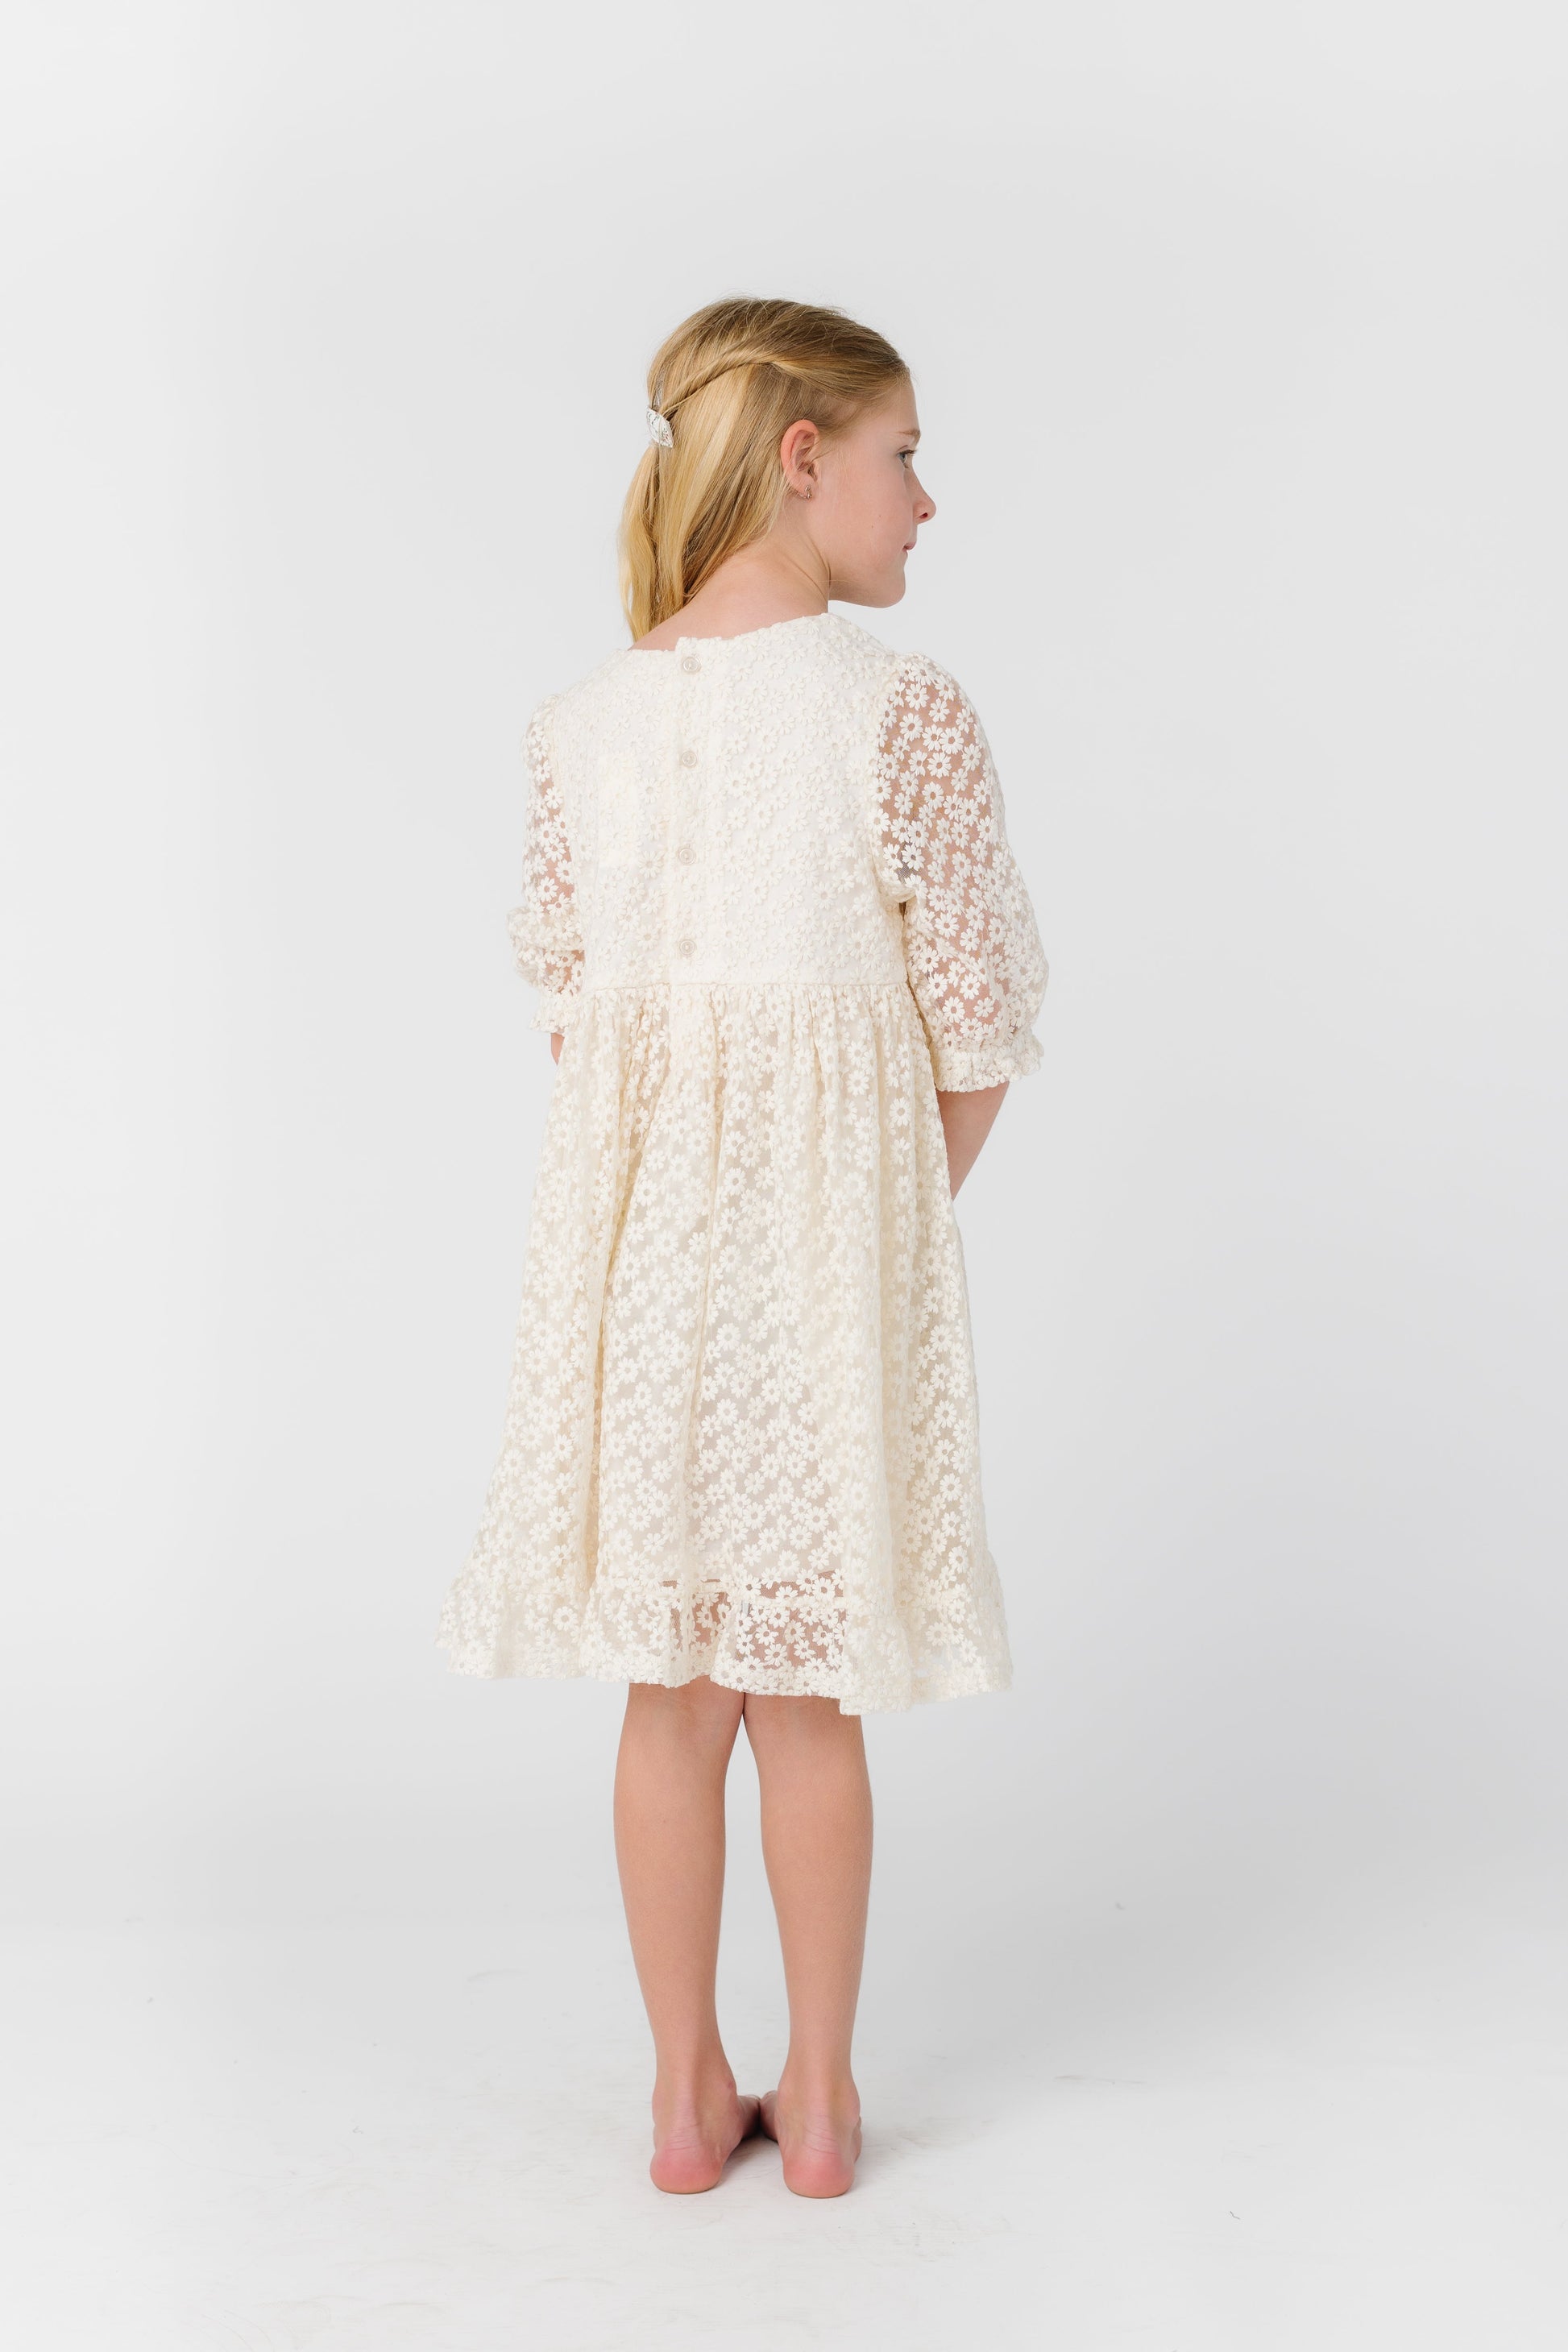 Brass & Roe It's Your Day Lace Girl's Dress – Called to Surf